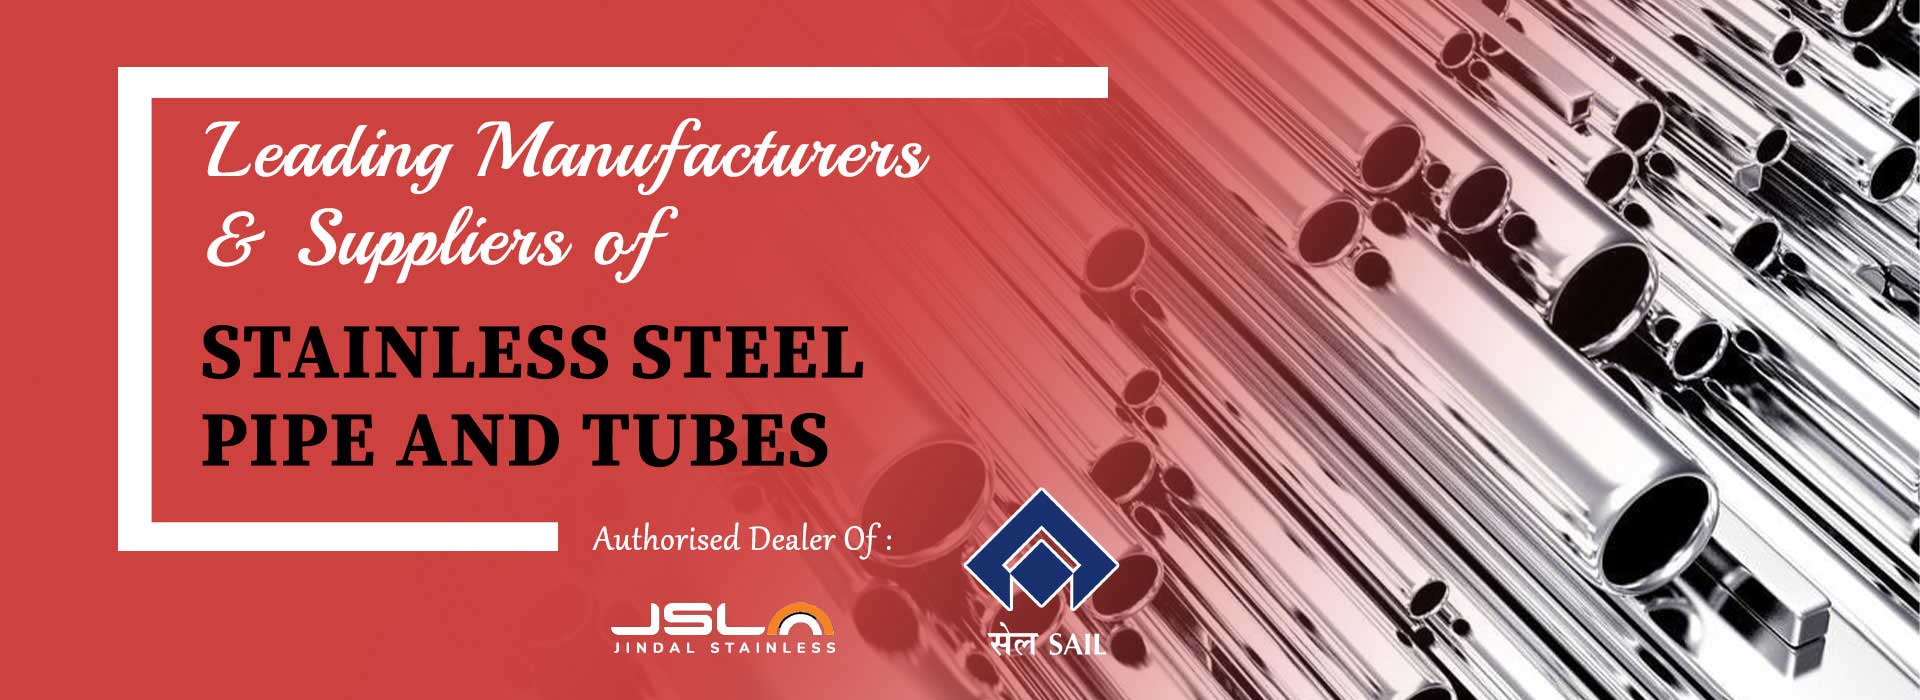 Stainless Steel Pipe and Tubes Manufacturers in Pune